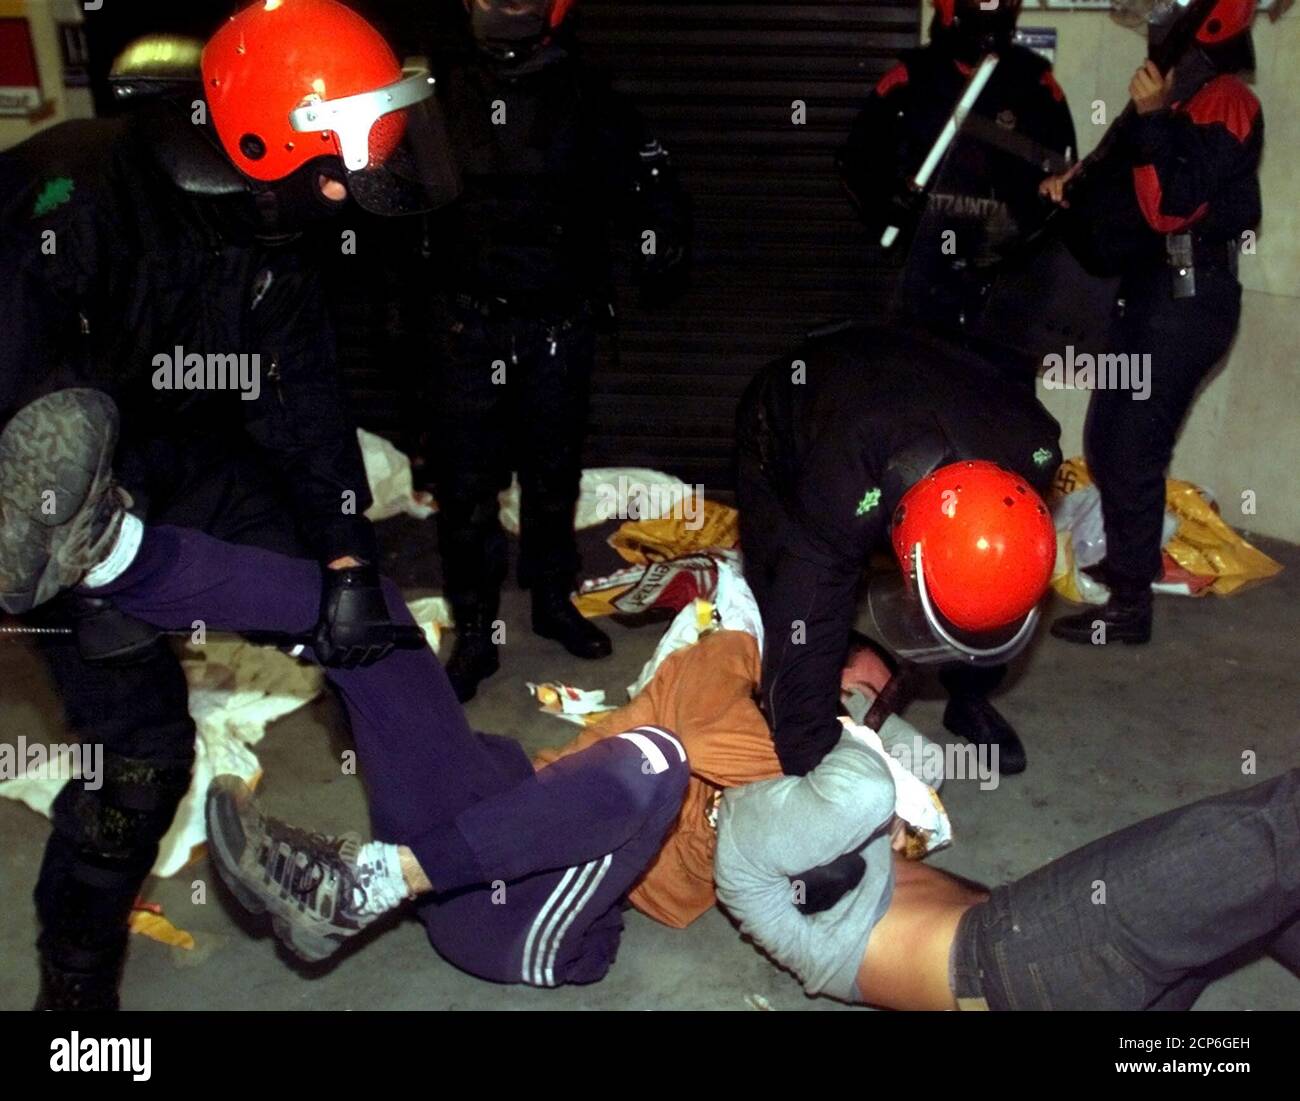 Members of Ertzanintza (The Basque Autonomous Police) arrest Batasuna's supporters outside the party's headquarters in San Sebastian August 27, 2002. Police breached human barricades and seized offices of the pro-independence Basque party Batasuna in three Basque cities on Tuesday, enforcing a Spanish judge's order to shut it down for its links to armed group ETA. REUTERS/Pablo Sanchez REUTERS  SP Stock Photo